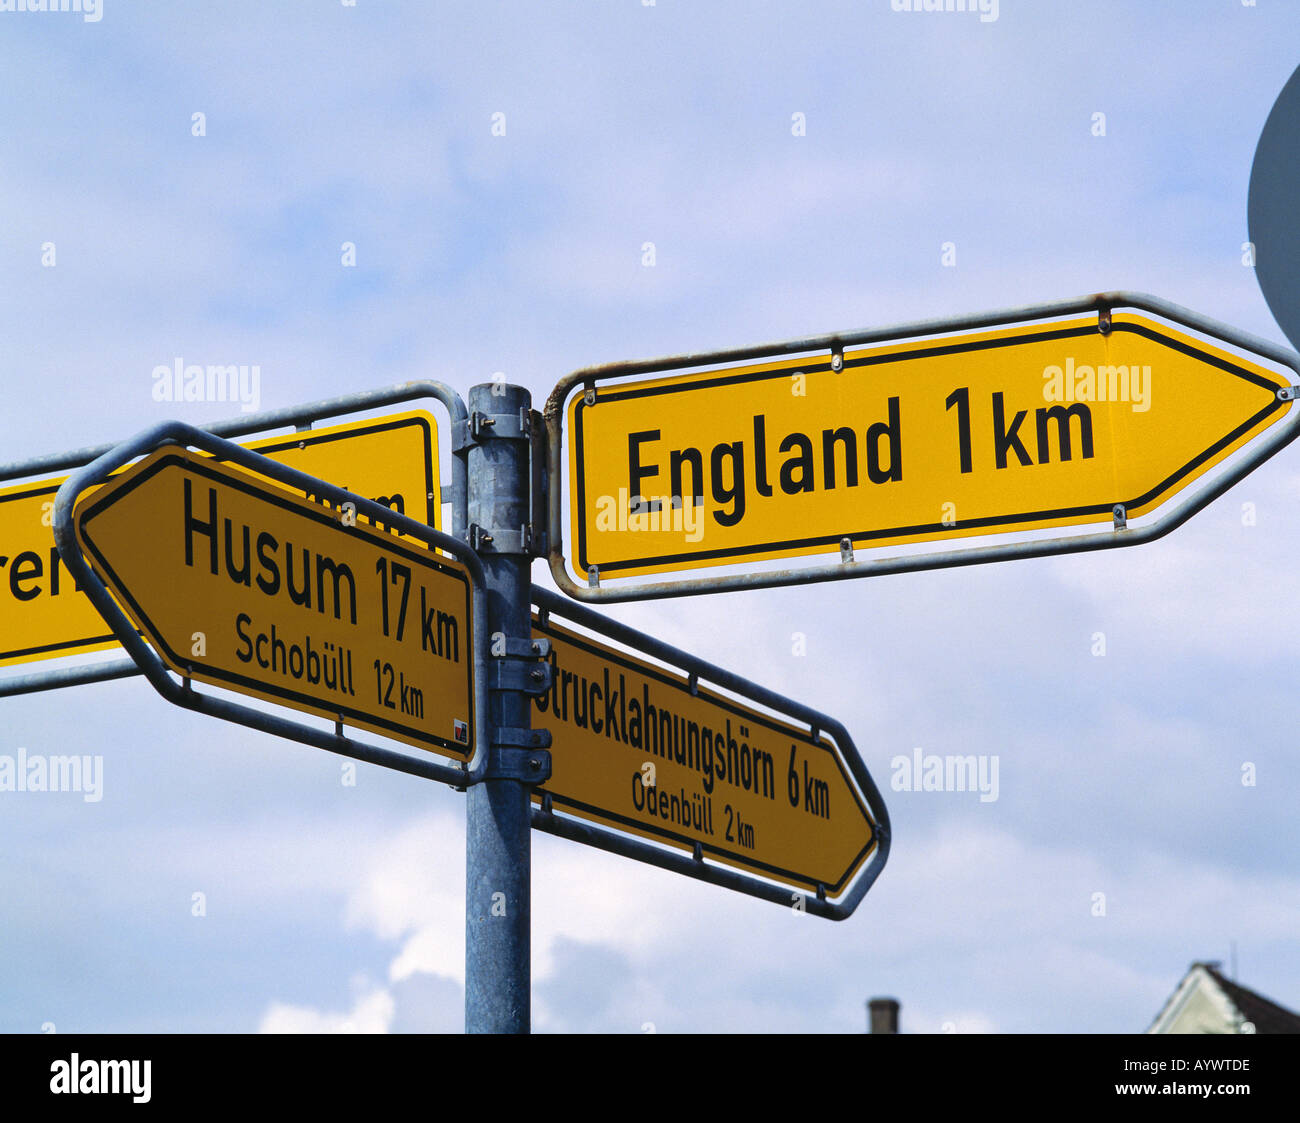 D-Nordstrand, North Sea, Schleswig-Holstein, road signs, direction signs on a crossroads showing to different towns and cities, intersection, Husum, Strucklahnungshoern, Schobuell, Odenbuell, England, funny sign shows a distance of one kilometer to reach Stock Photo